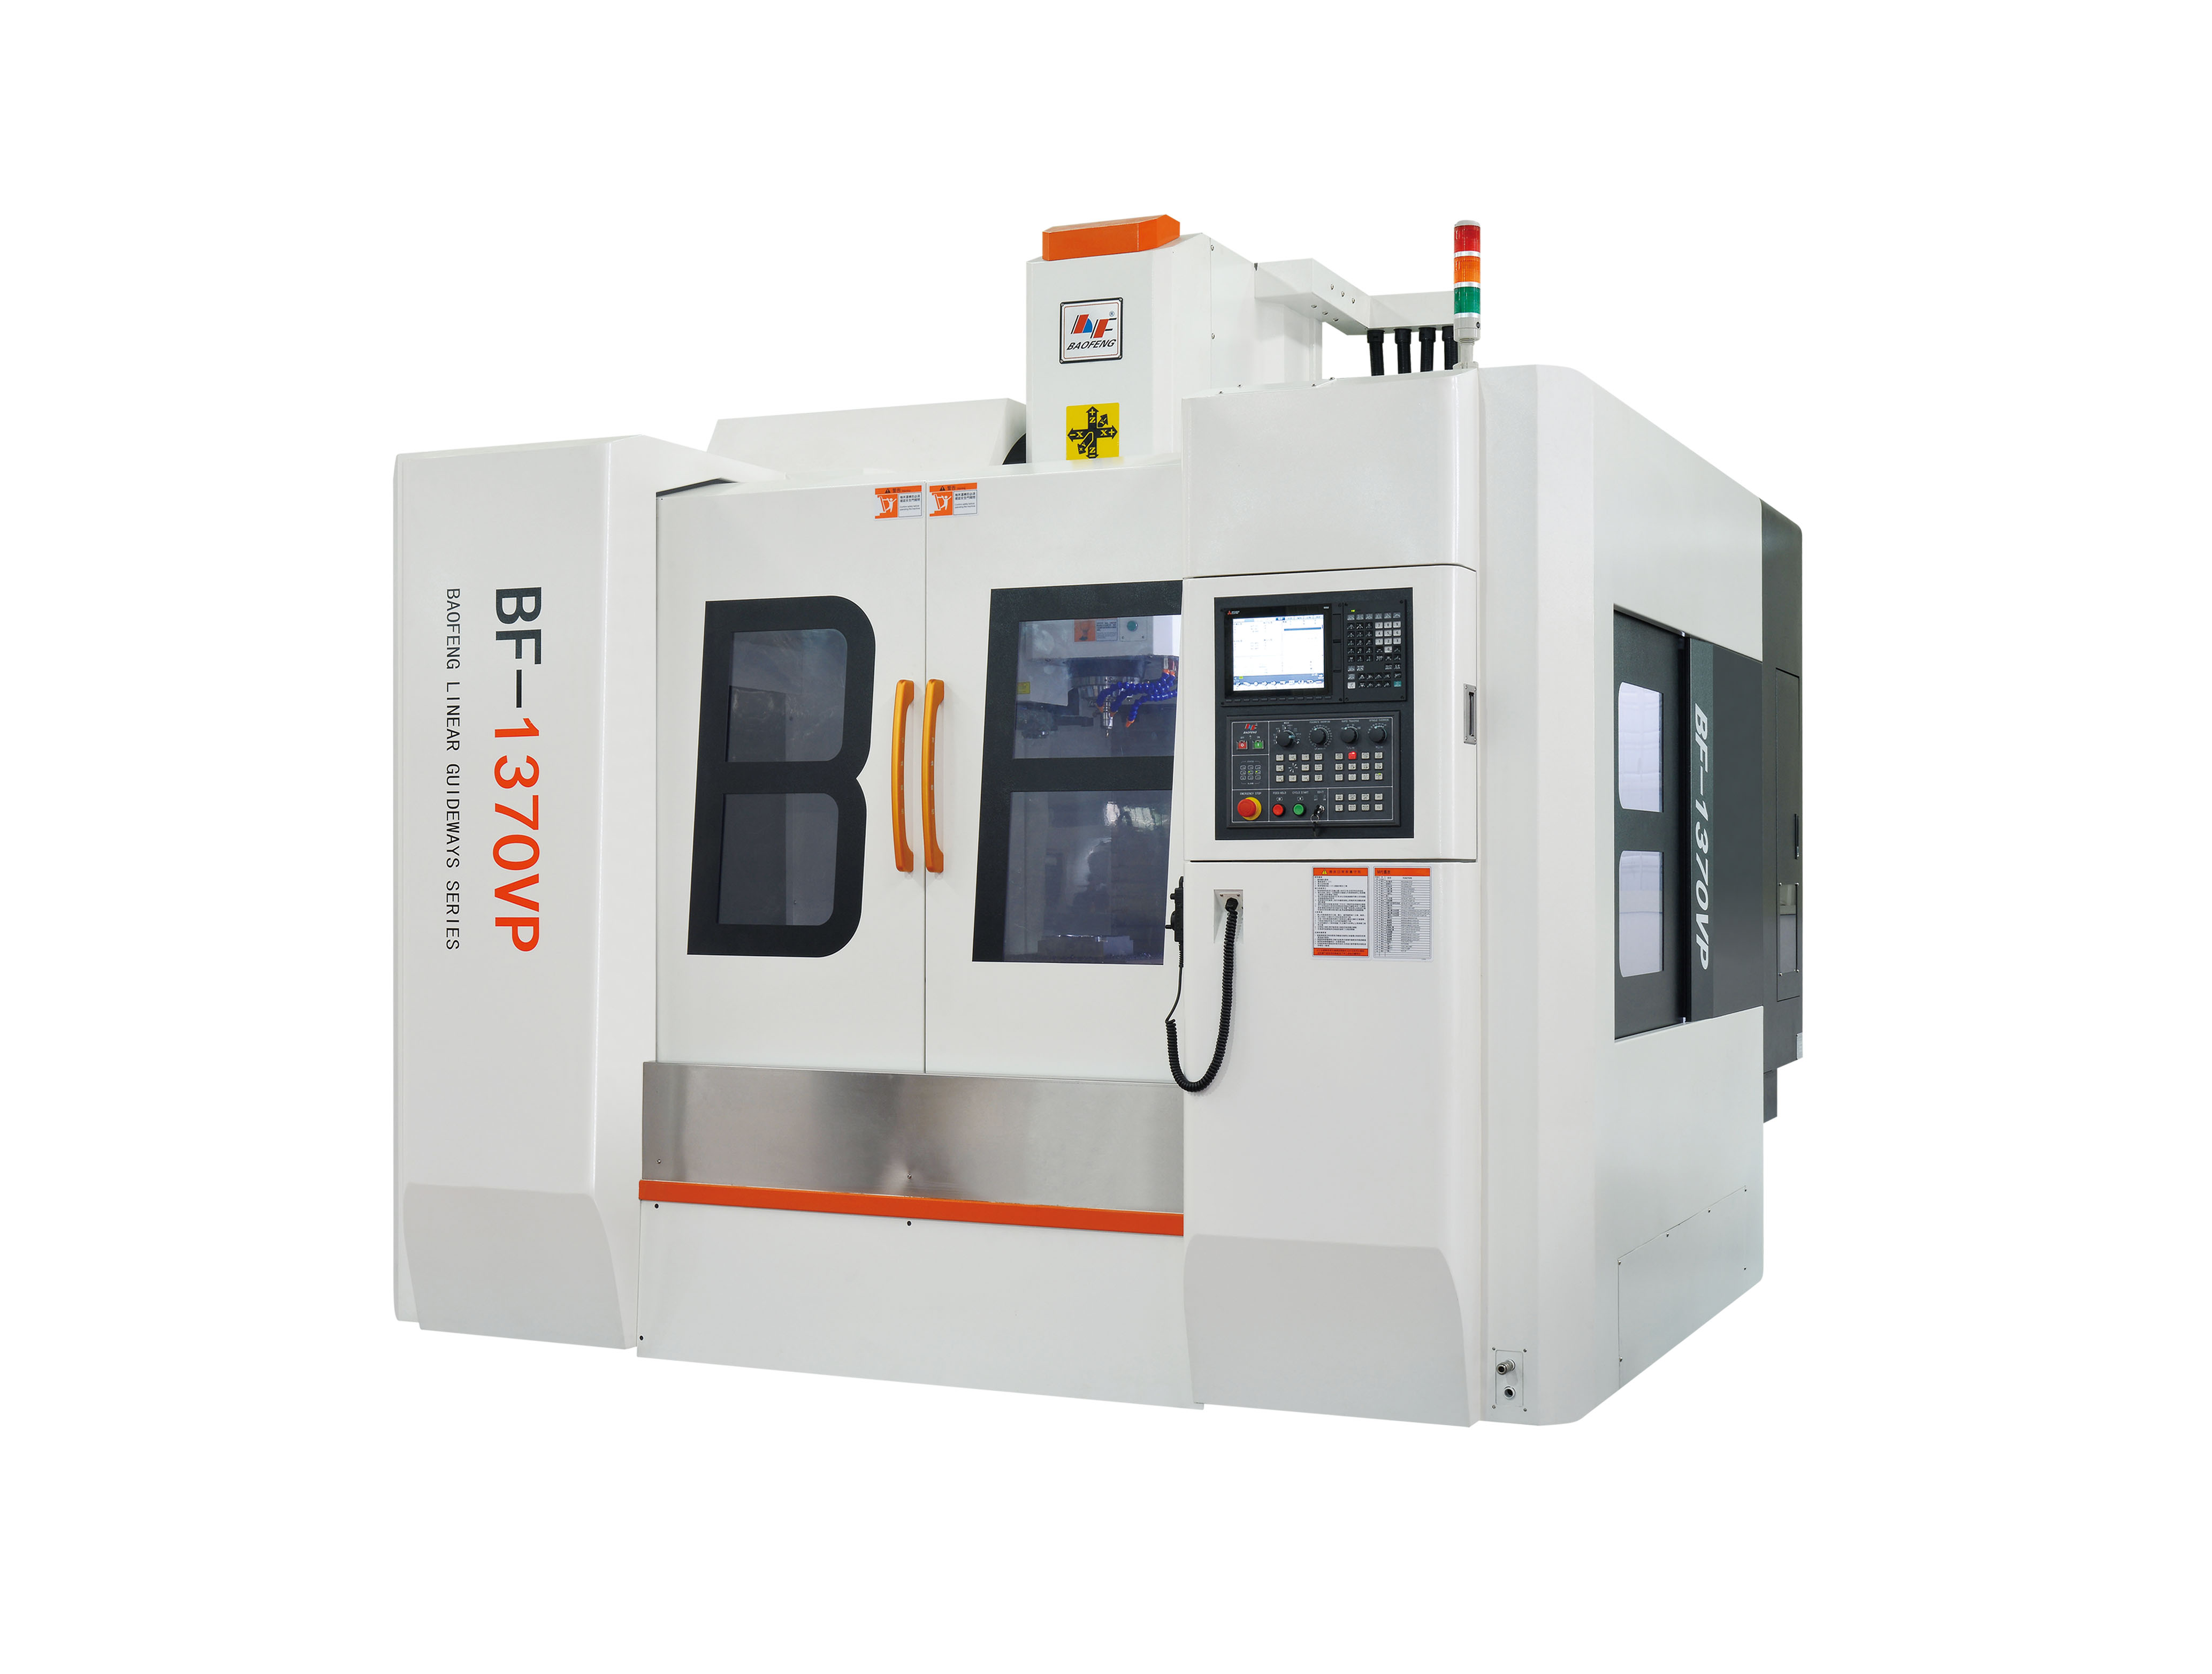 Why is machining center machine tool low precision? 